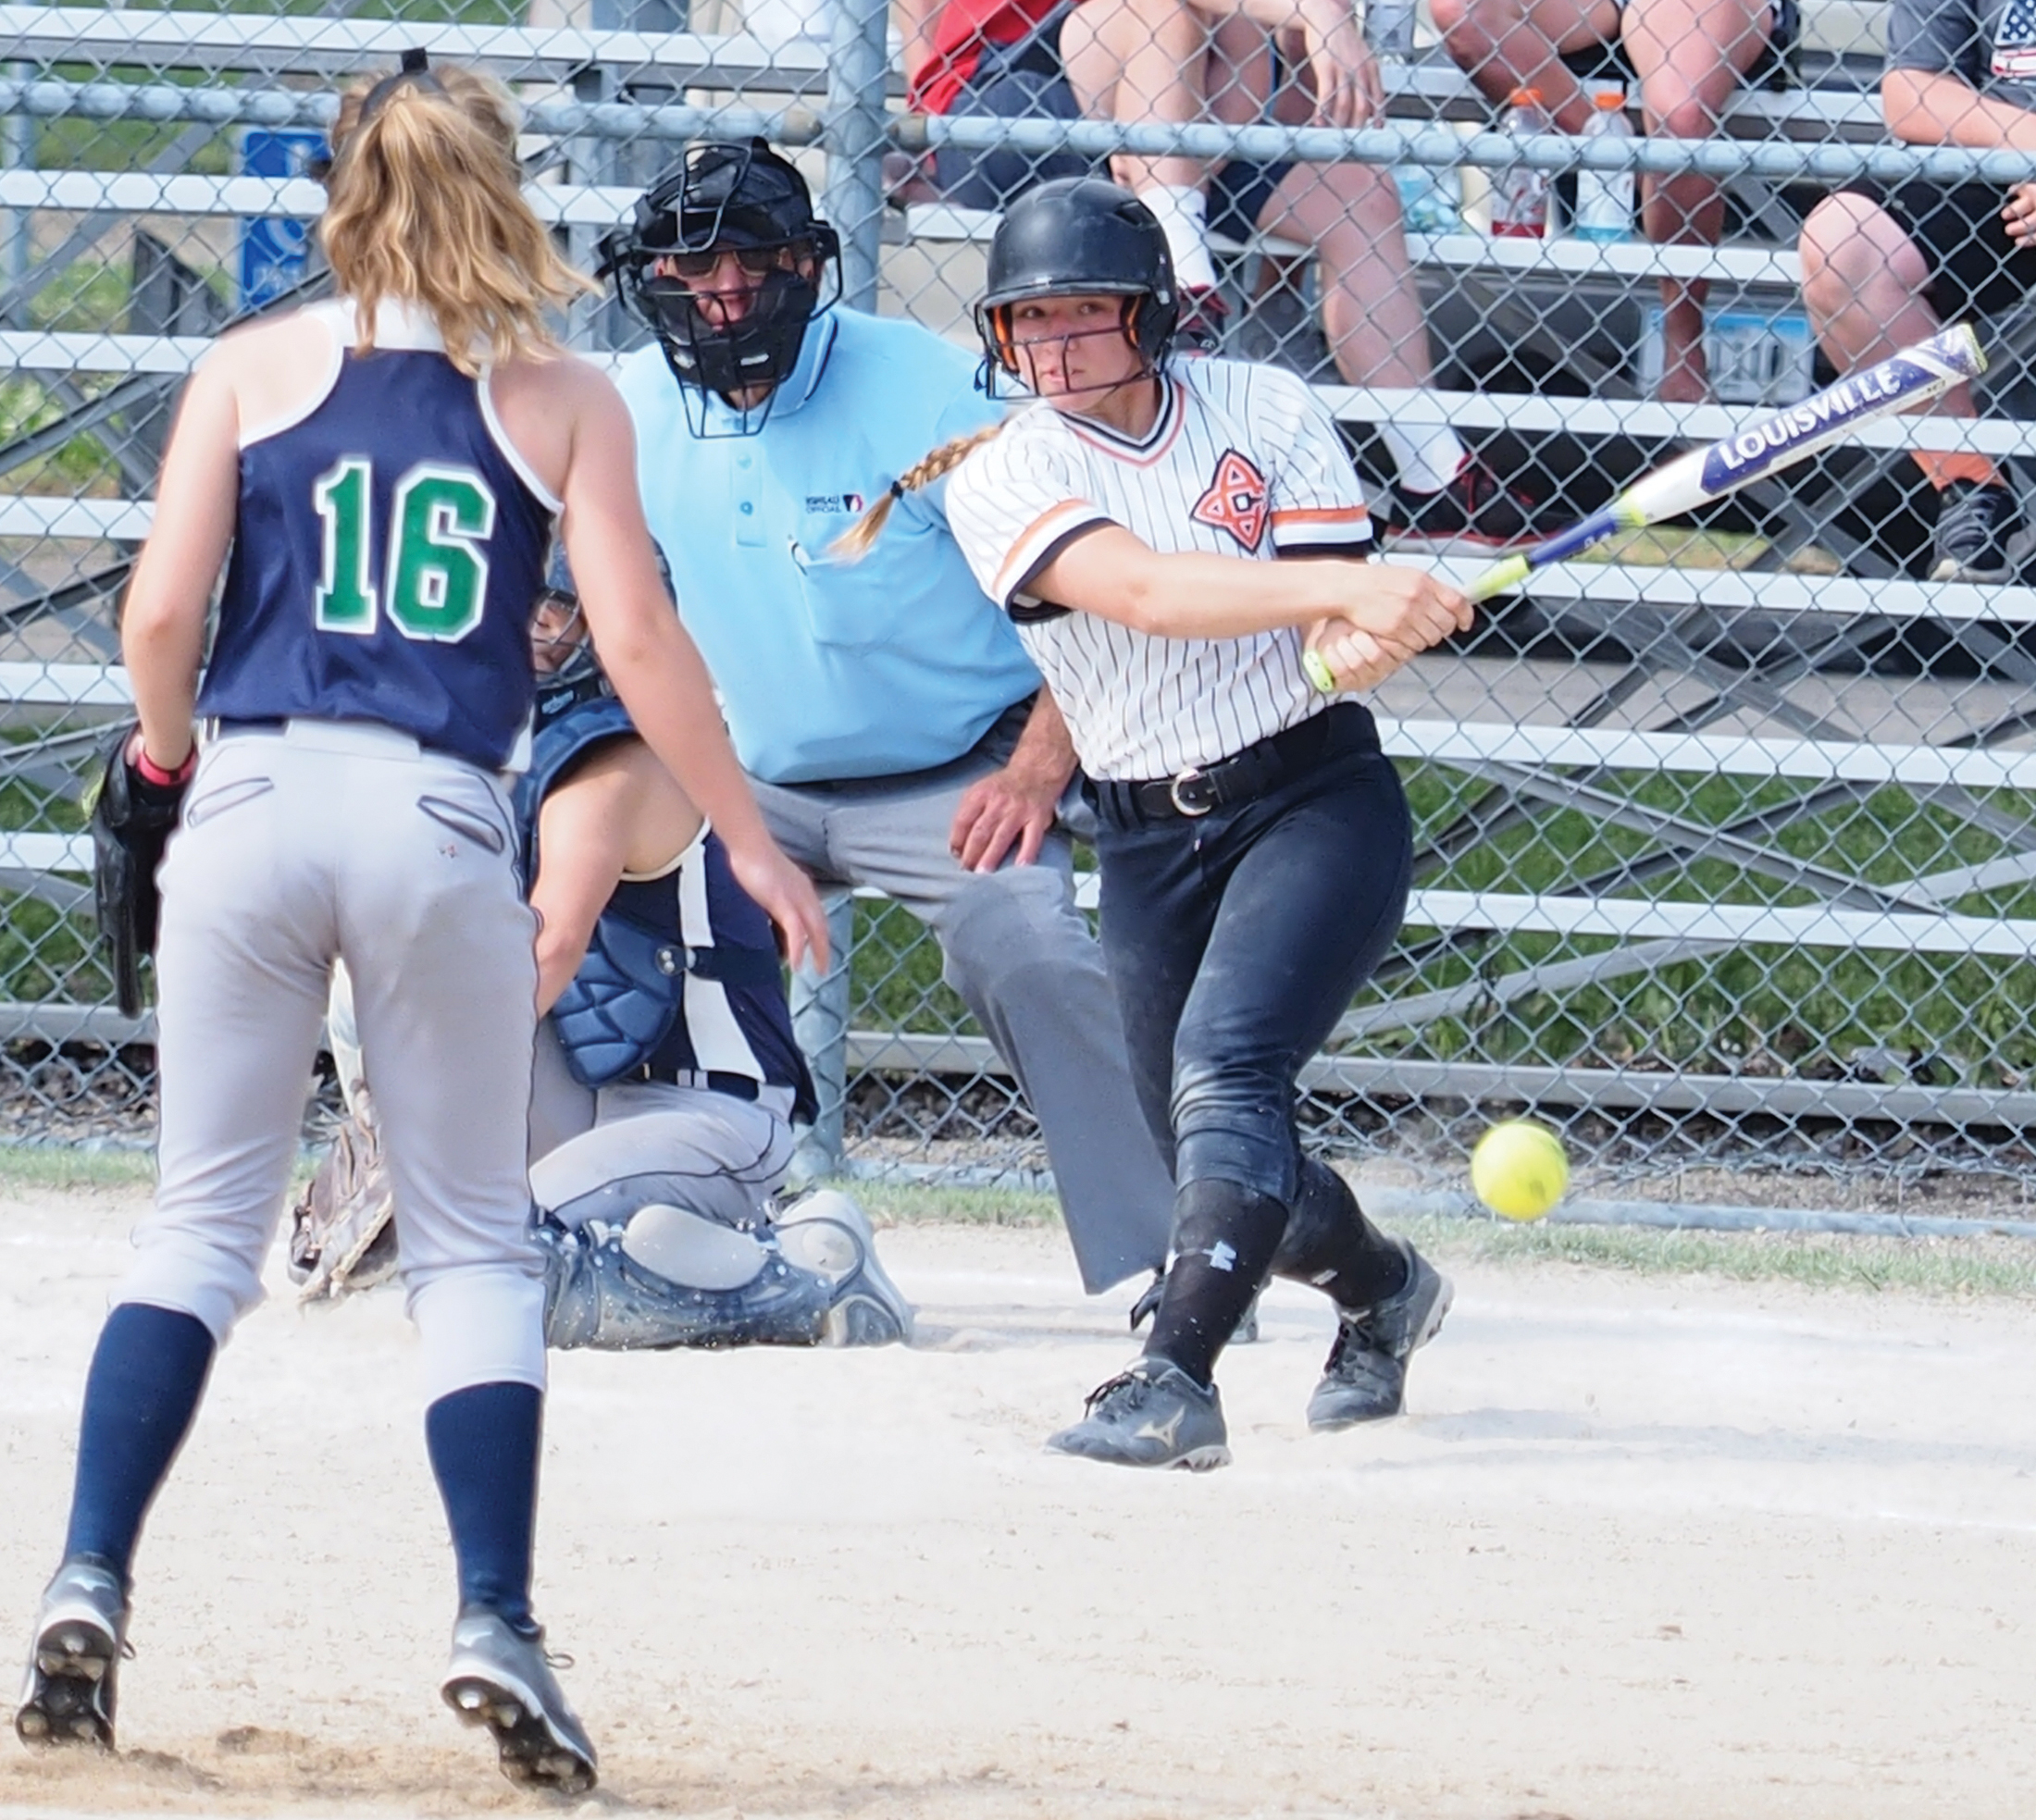 Comets beat state-ranked Bearcats in Newton Softball Classic finale